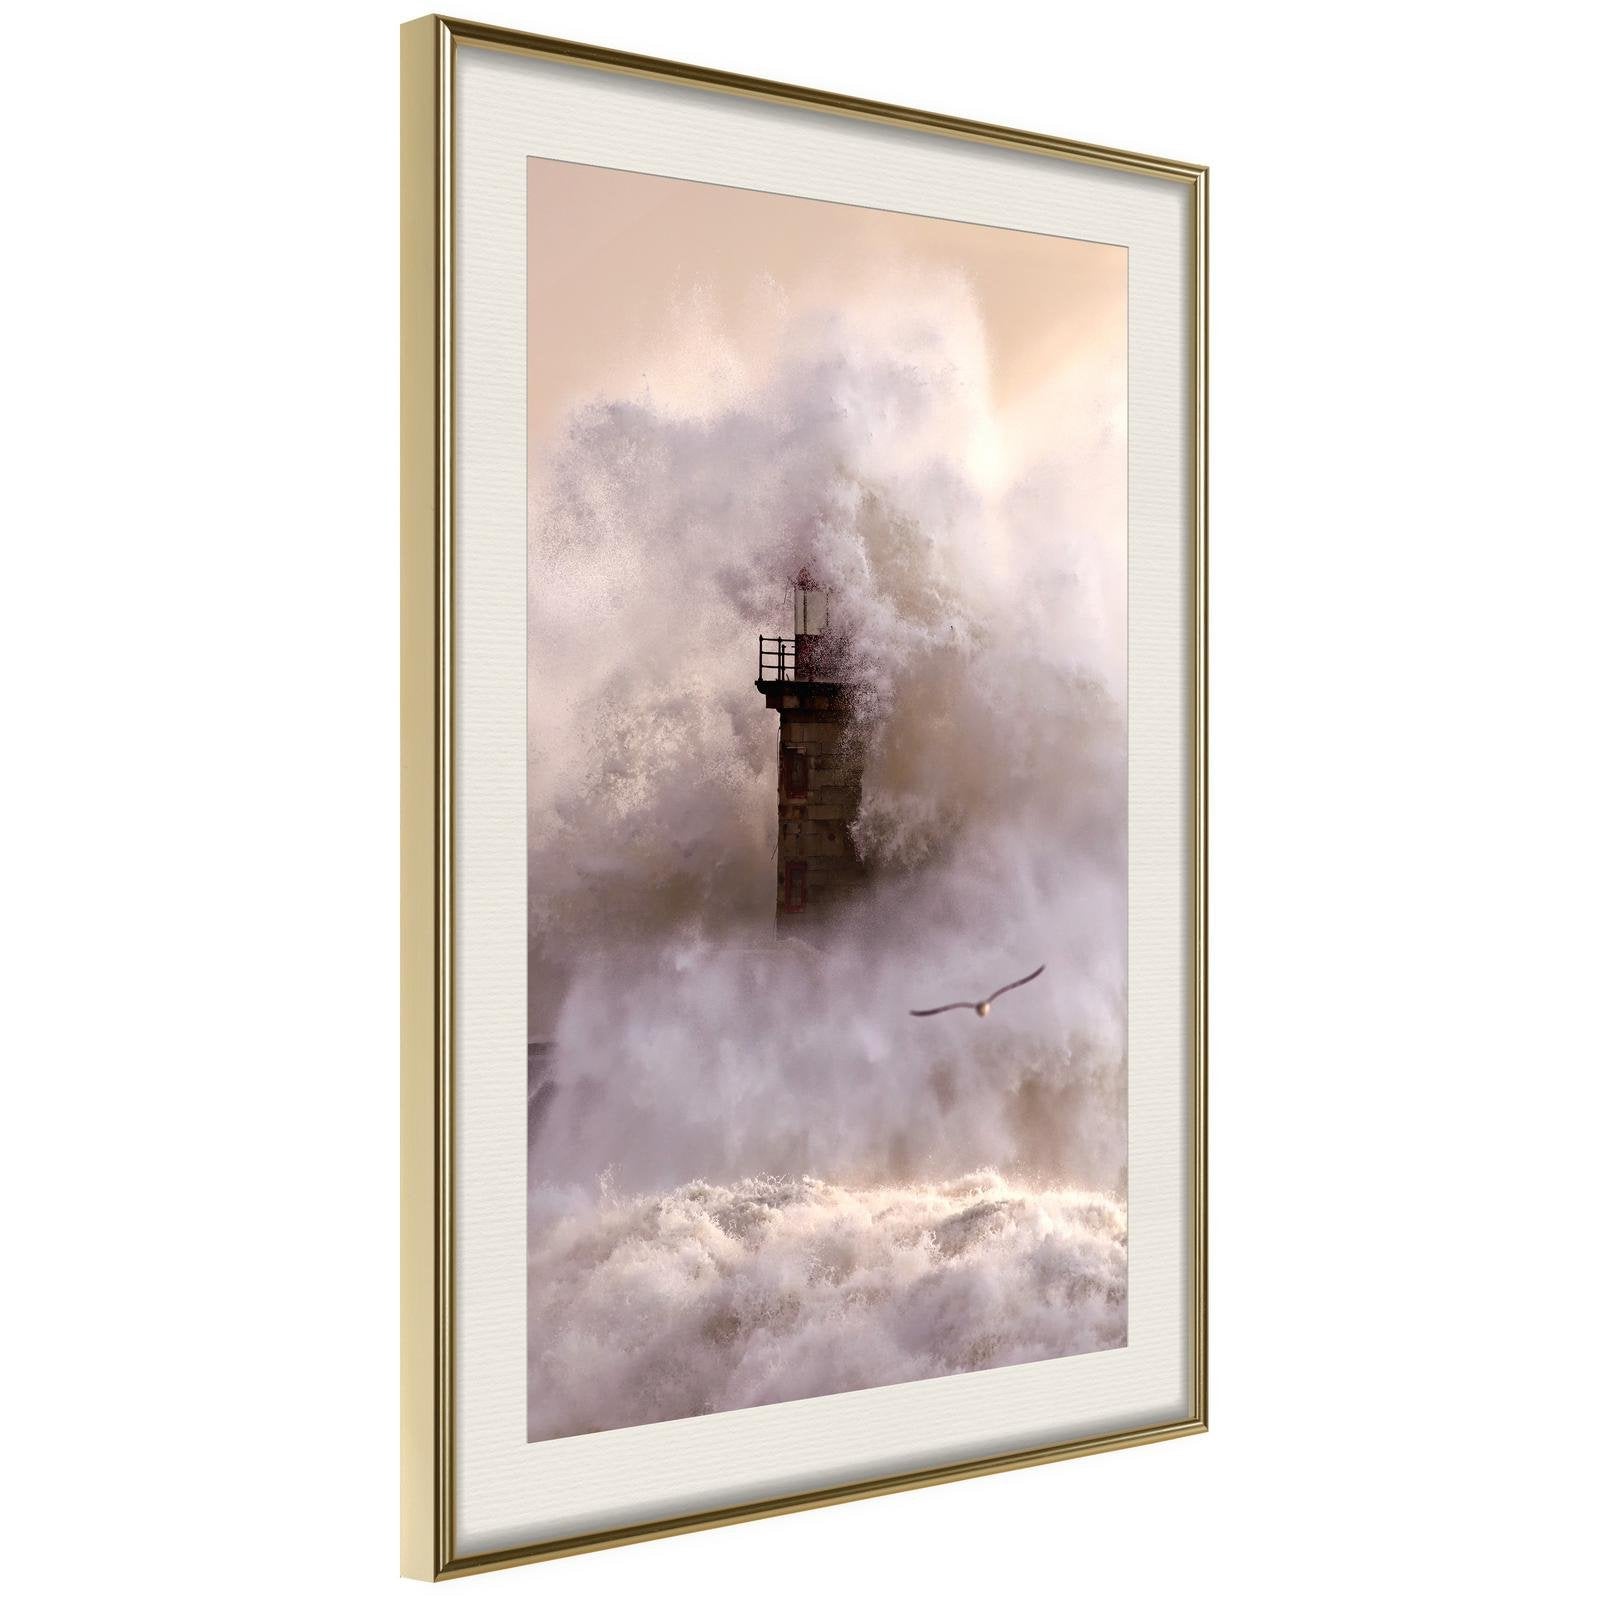 Inramad Poster / Tavla - Lighthouse During a Storm-Poster Inramad-Artgeist-20x30-Guldram med passepartout-peaceofhome.se